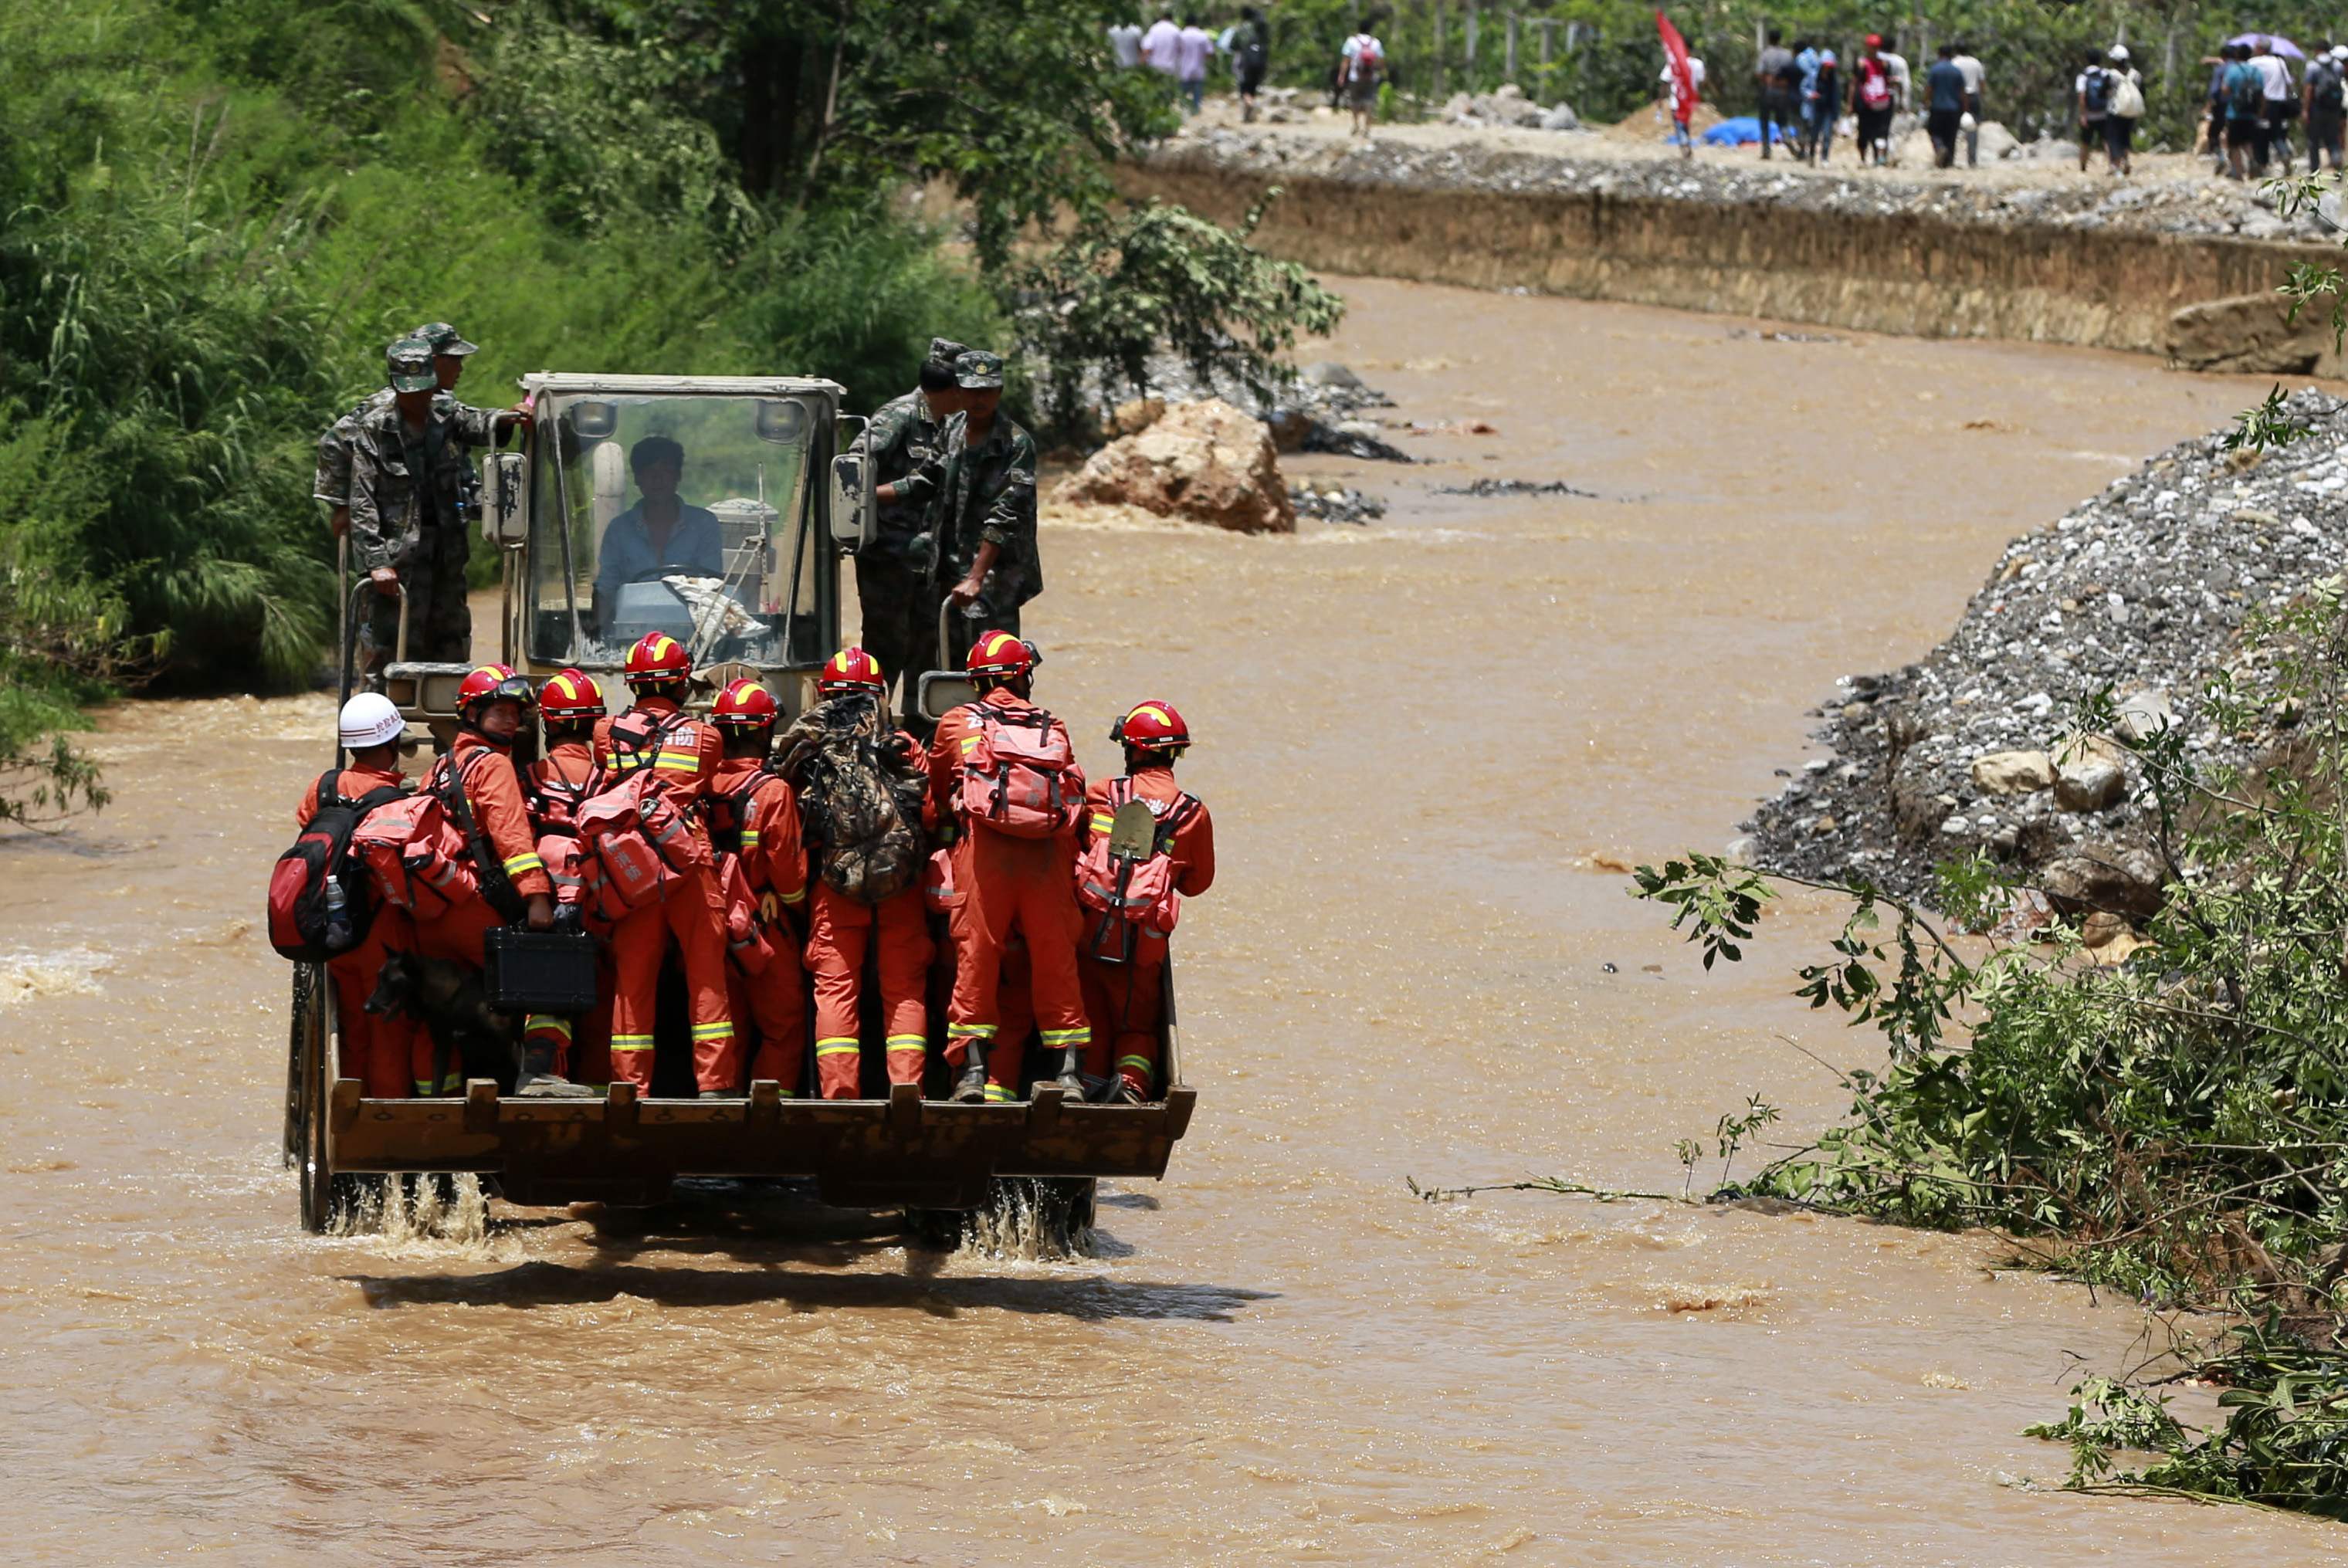 Rescue workers are transported into an earthquake zone on a front loader in Zhaotong, Yunnan province, August 5, 2014. (Photo: Reuters)